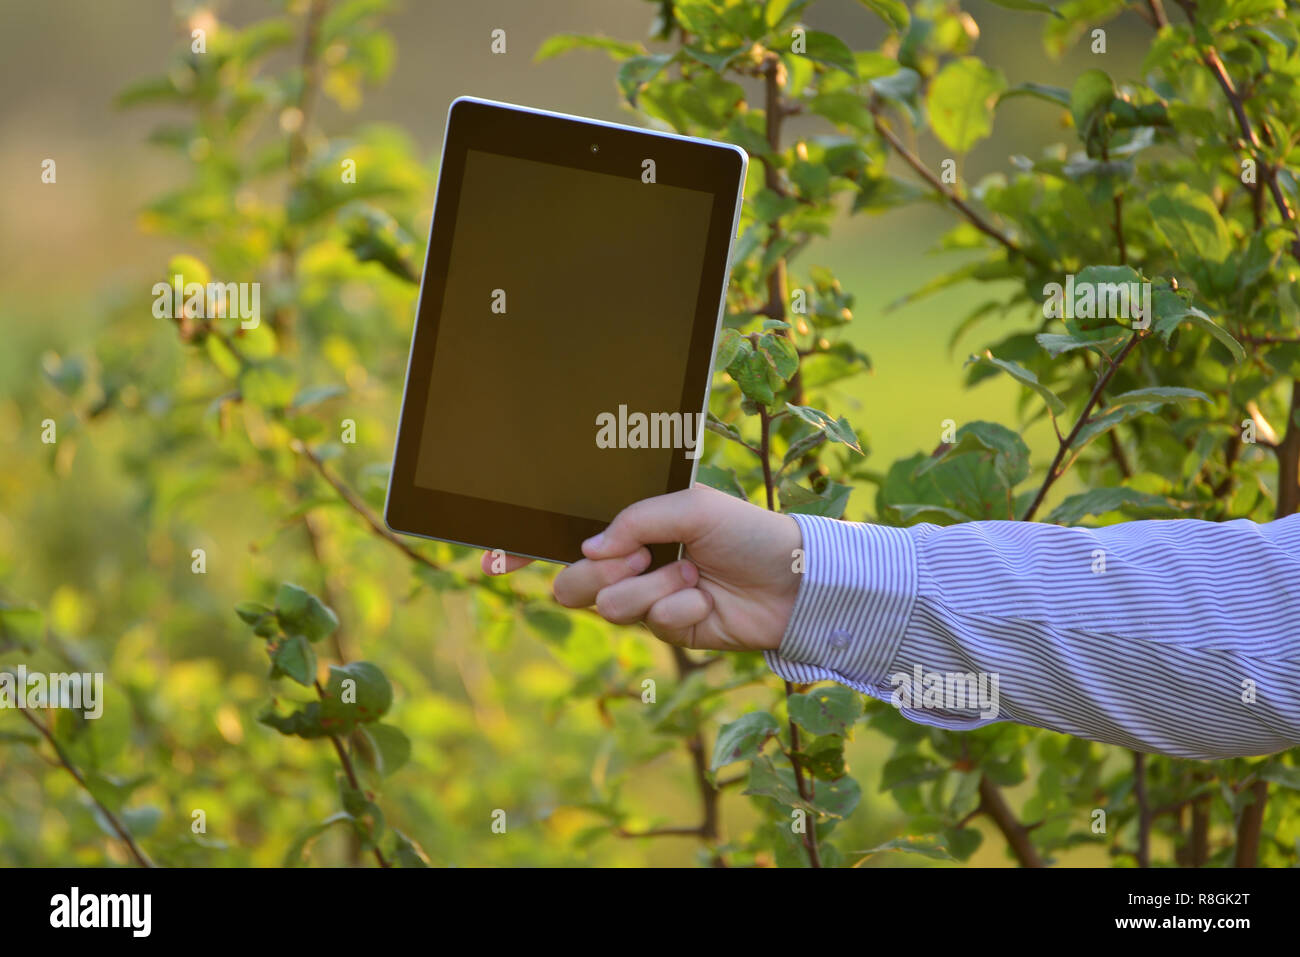 Tablet computer in  children's hand on nature Stock Photo